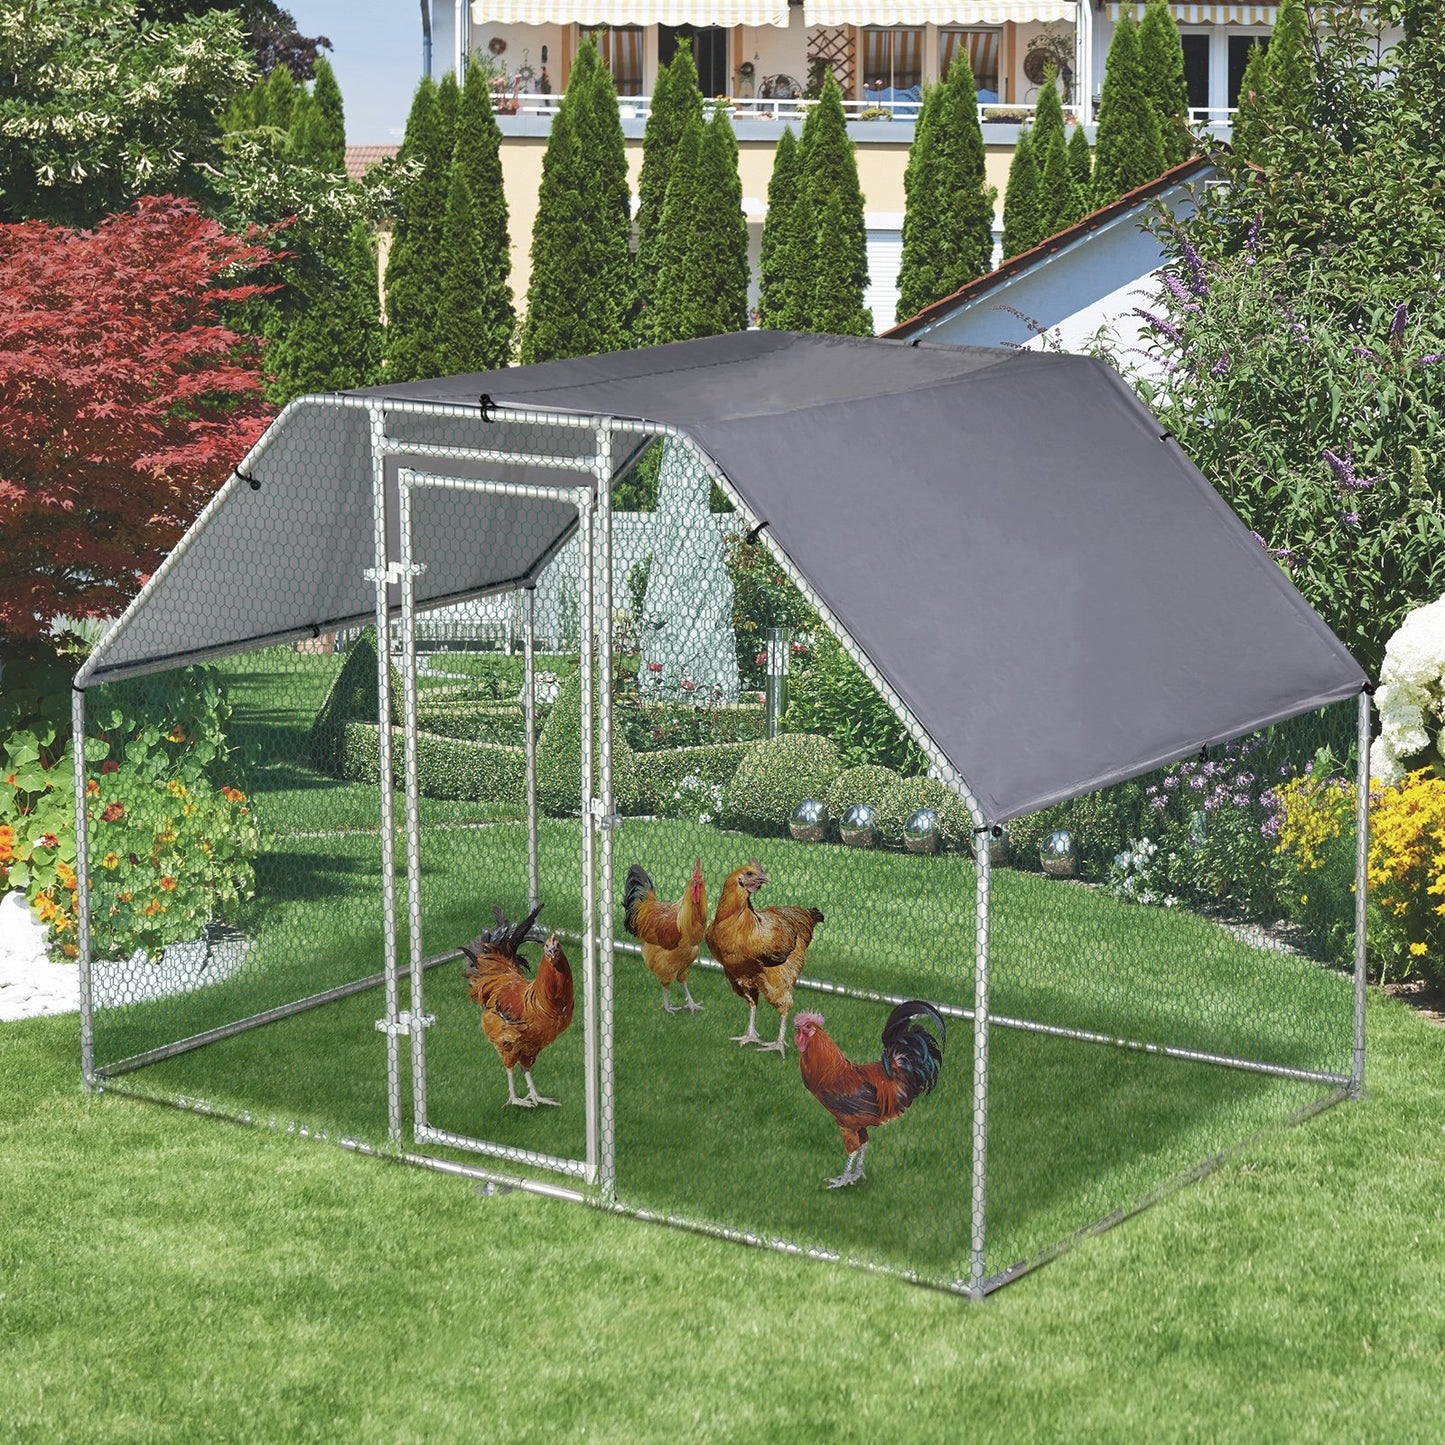 PawHut Large Metal Chicken House Walk-In Chicken Coop Run Cage w/ Cover Outdoor, 280W x 190D x 195H cm